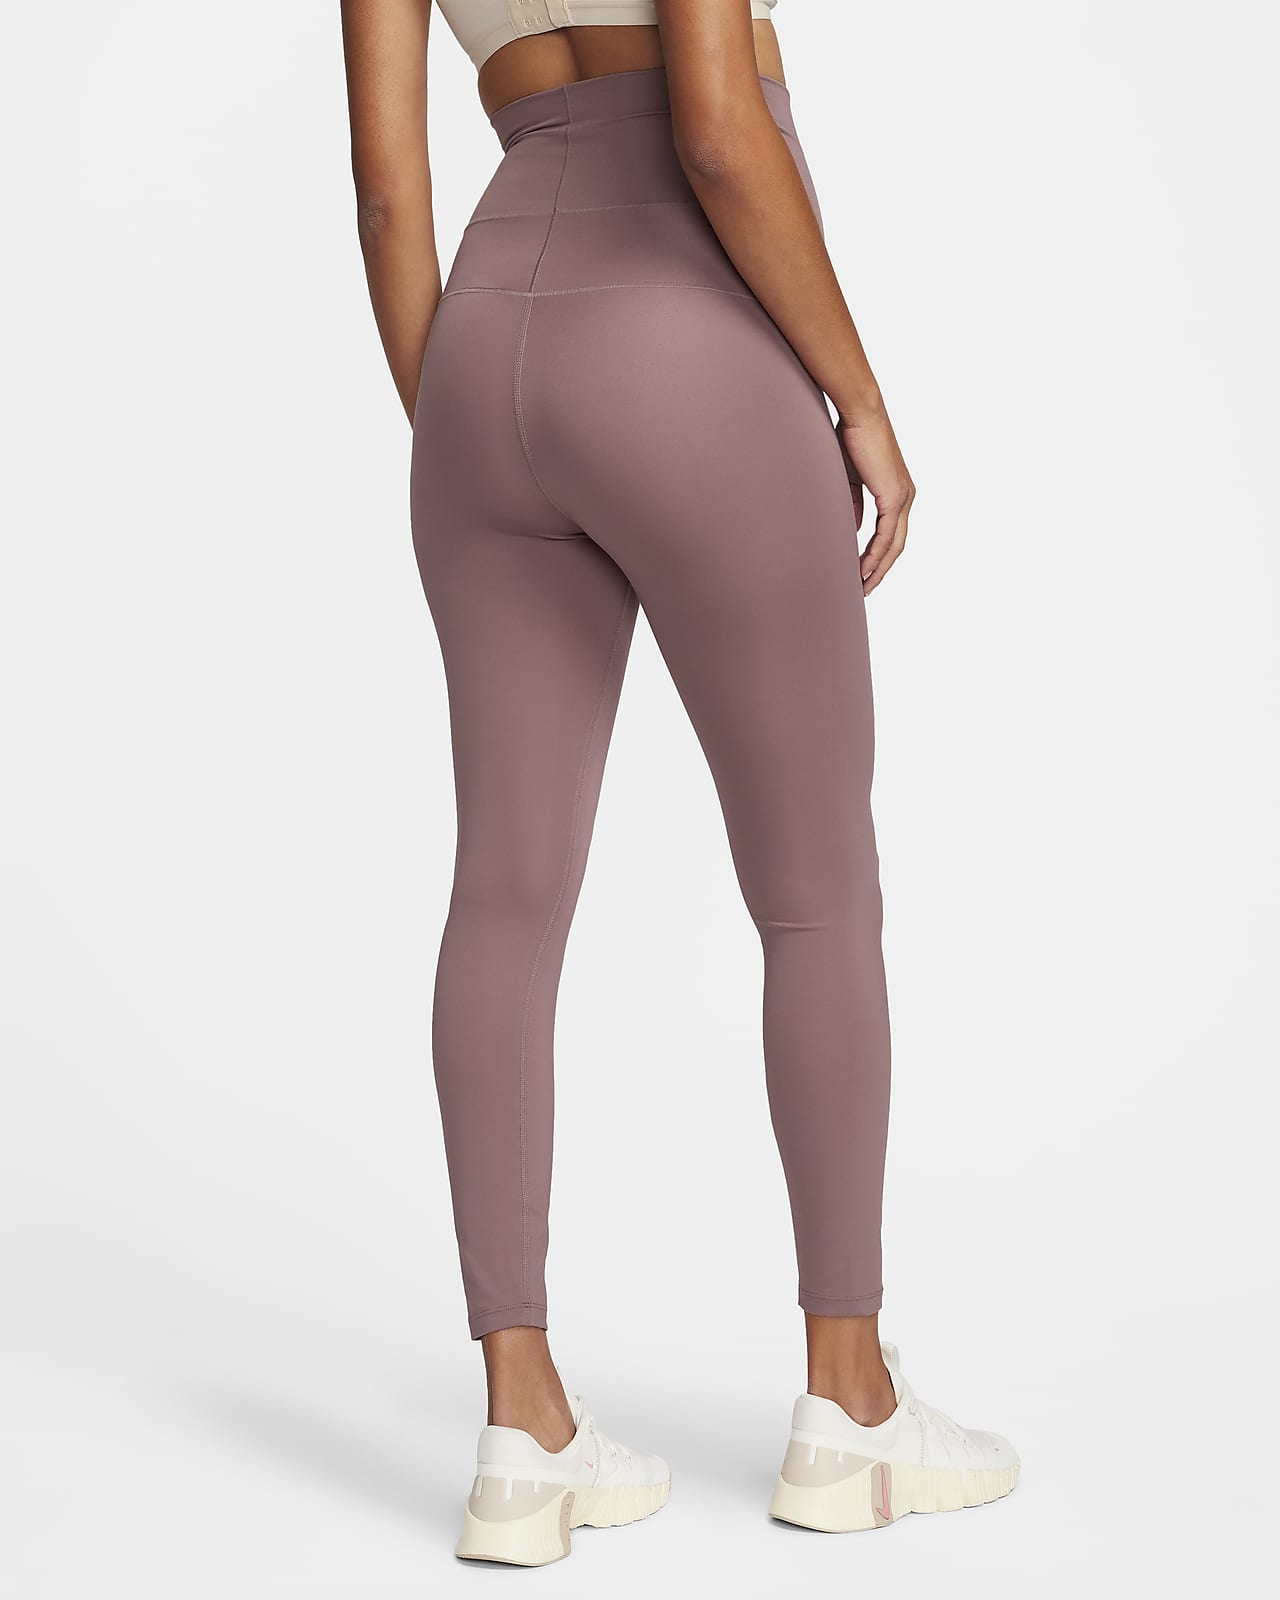 NWT Nike One (M) High-Waisted Leggings (Maternity) DH1587-010 Size